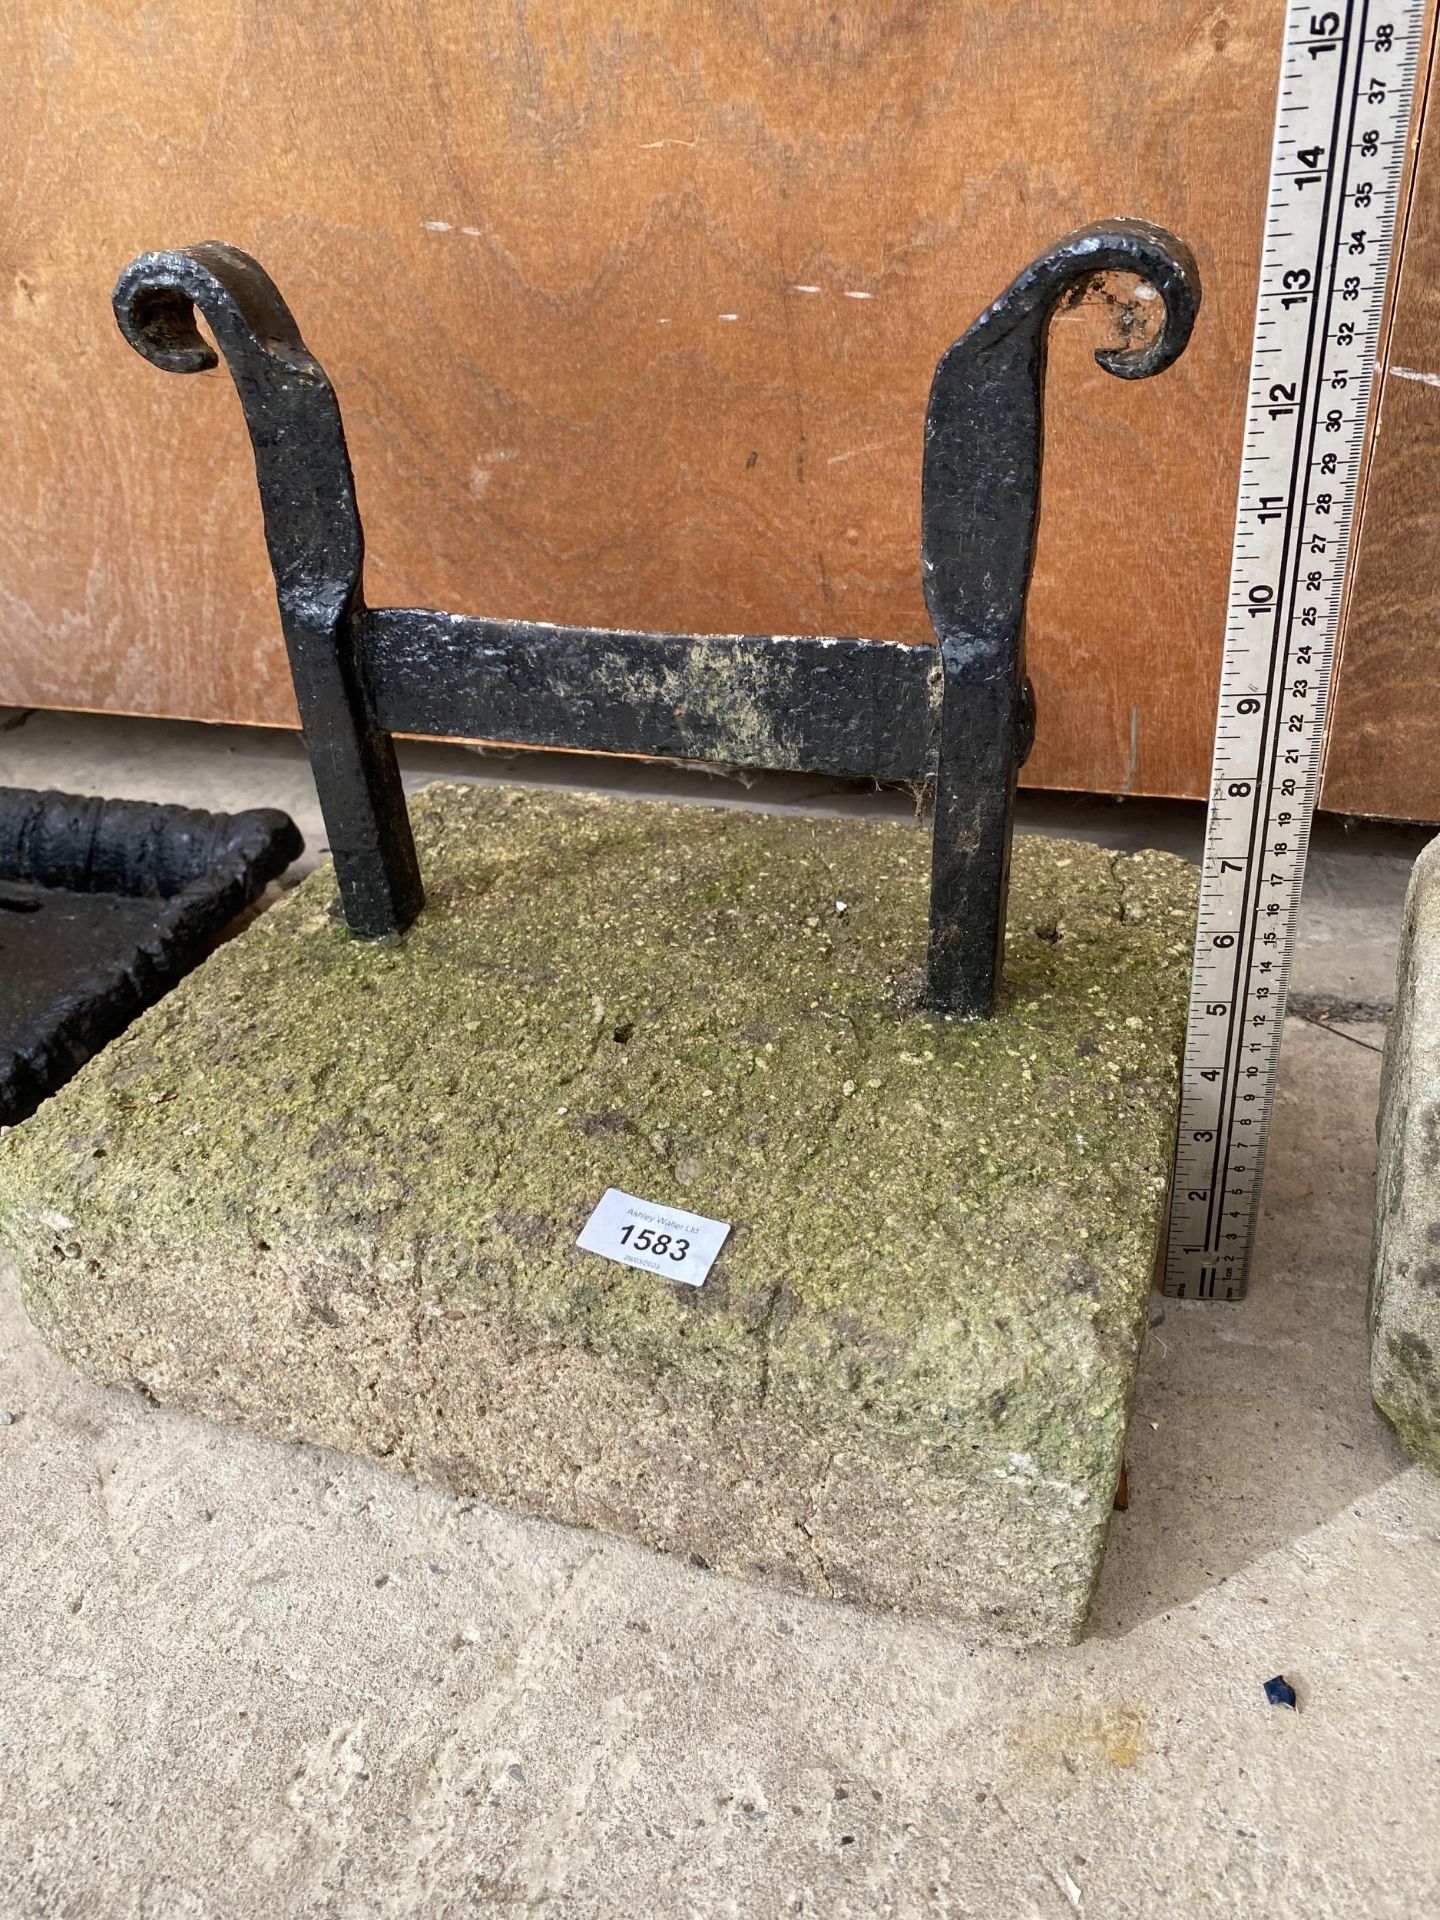 A METAL BOOT SCRAPER SET IN A PIECE OF YORK STONE - Image 2 of 3